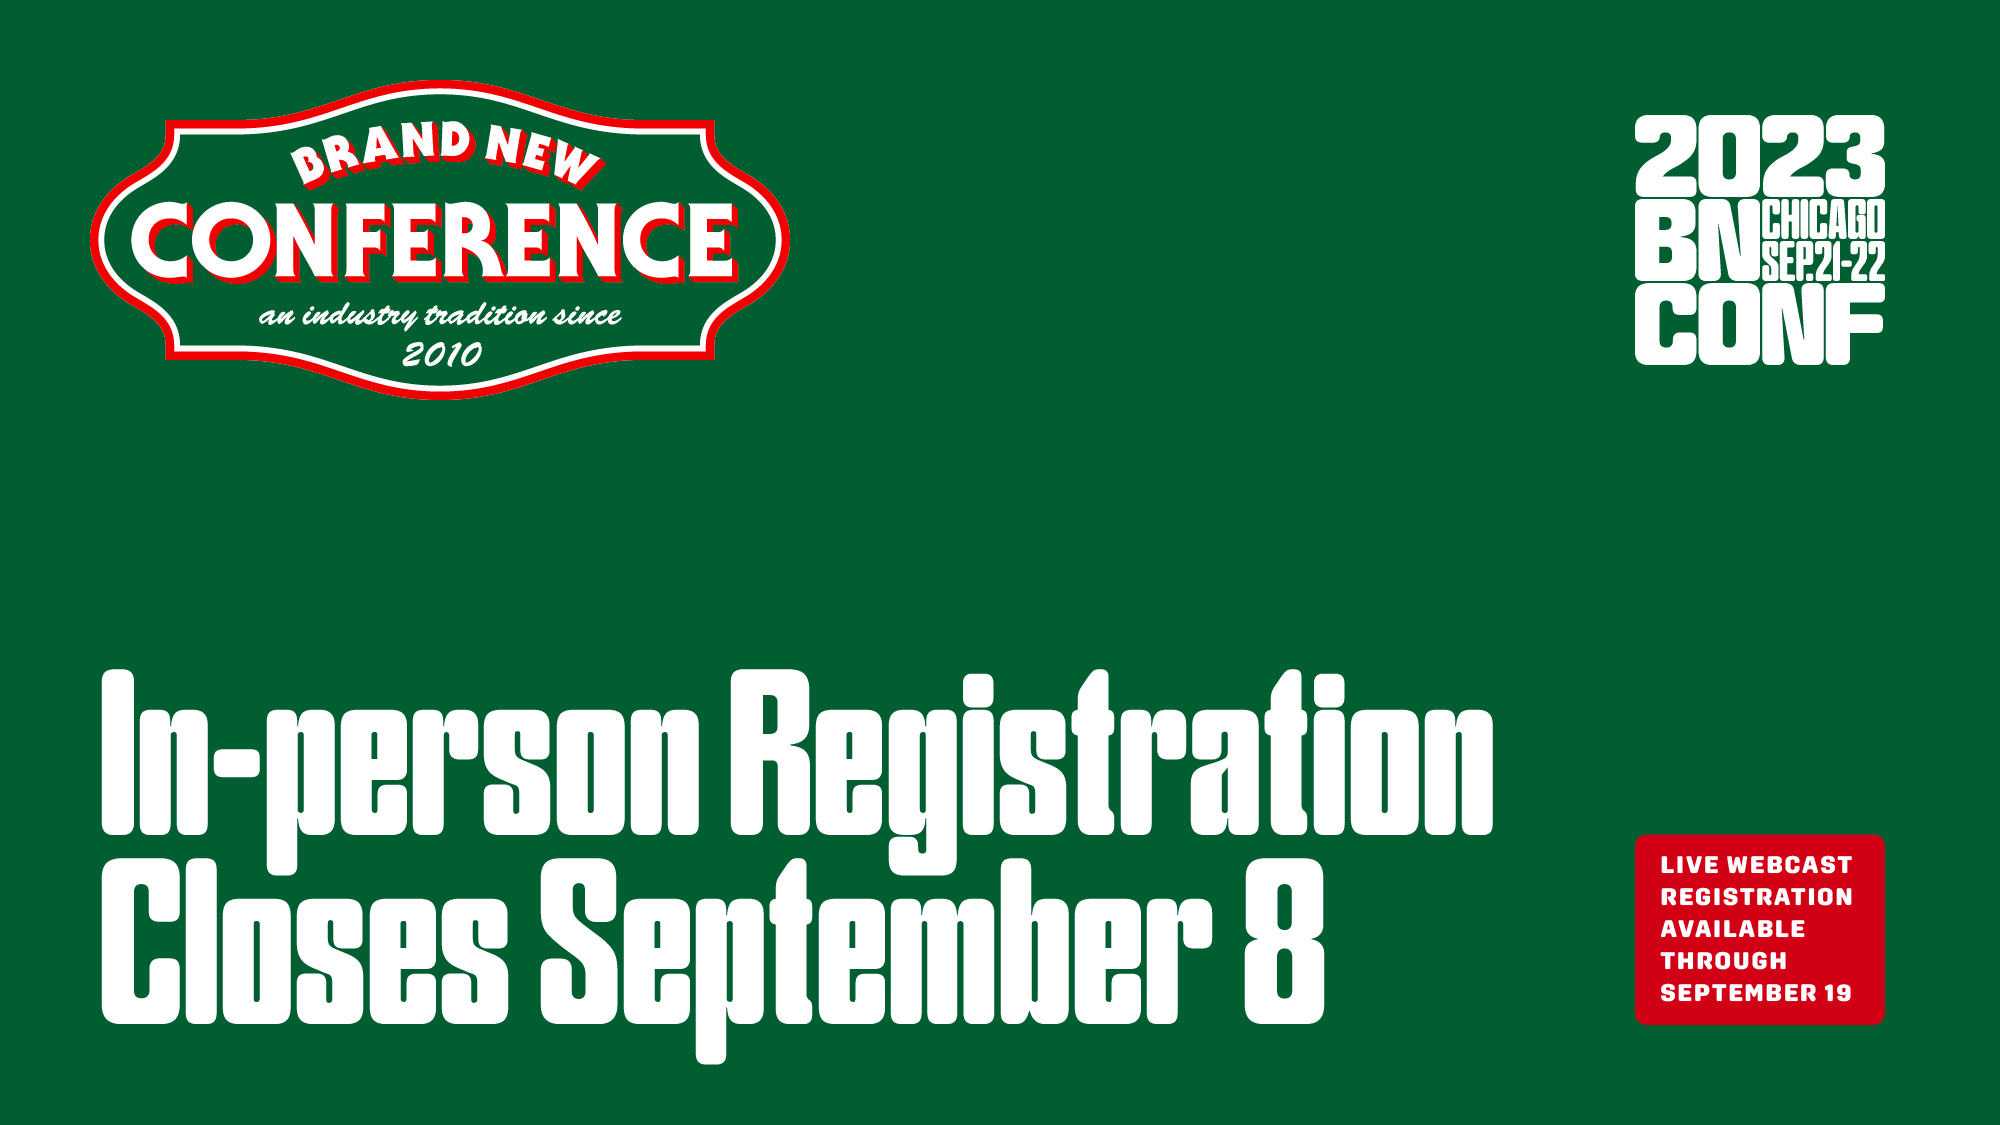 2023 Brand New Conference: In-person Registration Ending